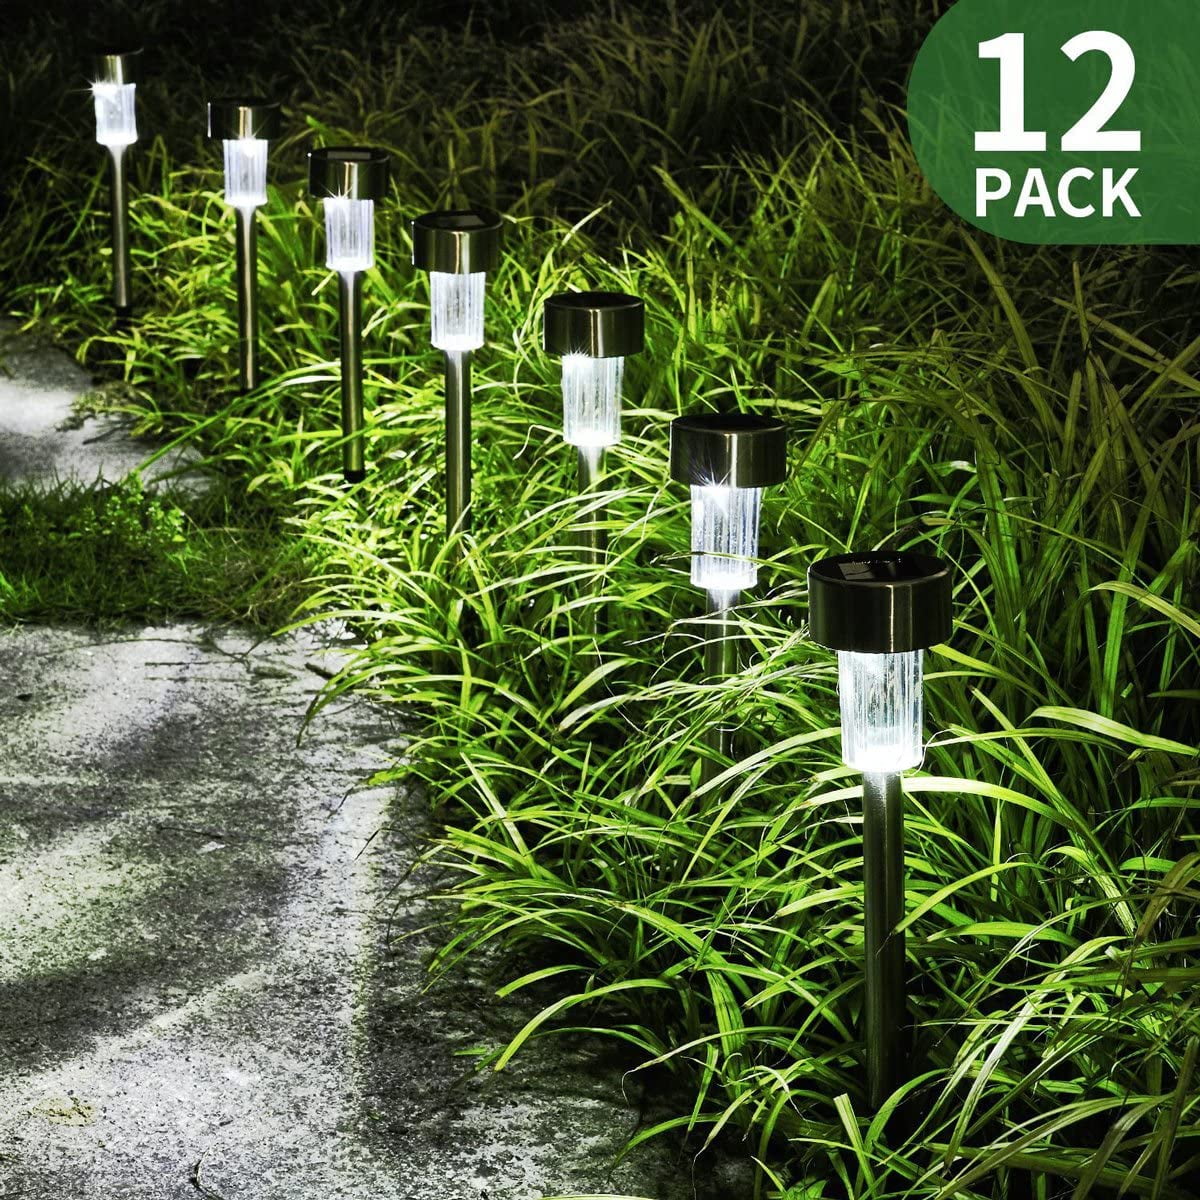 Yard Walkway Deck MAGGIFT 12 Pack Solar Pathway Lights Patio Auto Change Multicolor Outdoor RGB Color Changing Garden Lights Driveway IP44 Waterproof Solar Powered Landscape Lights for Lawn